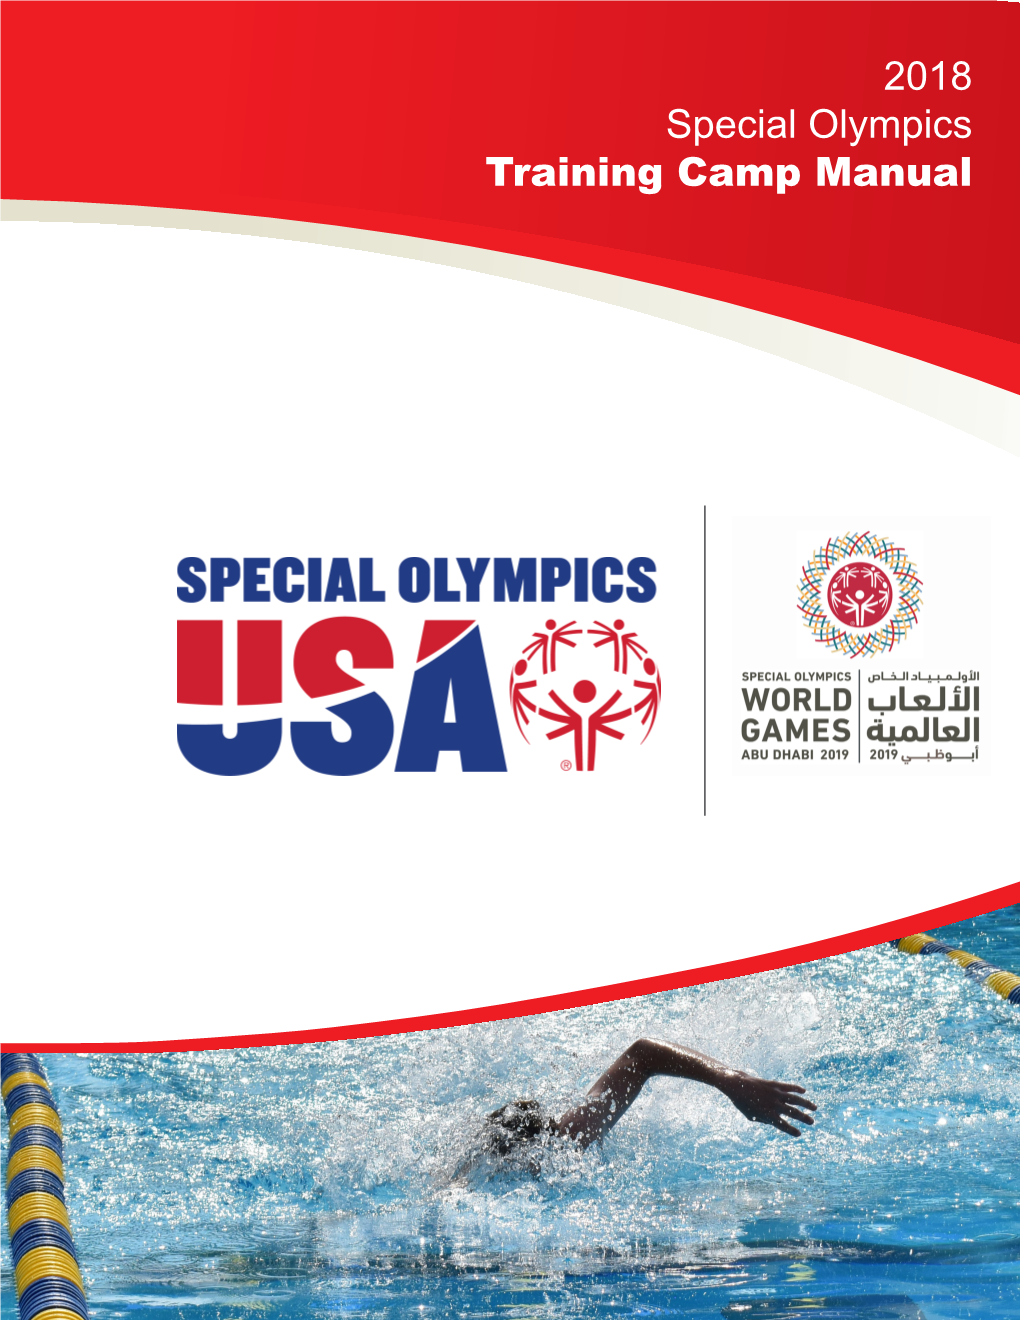 2018 Special Olympics Training Camp Manual